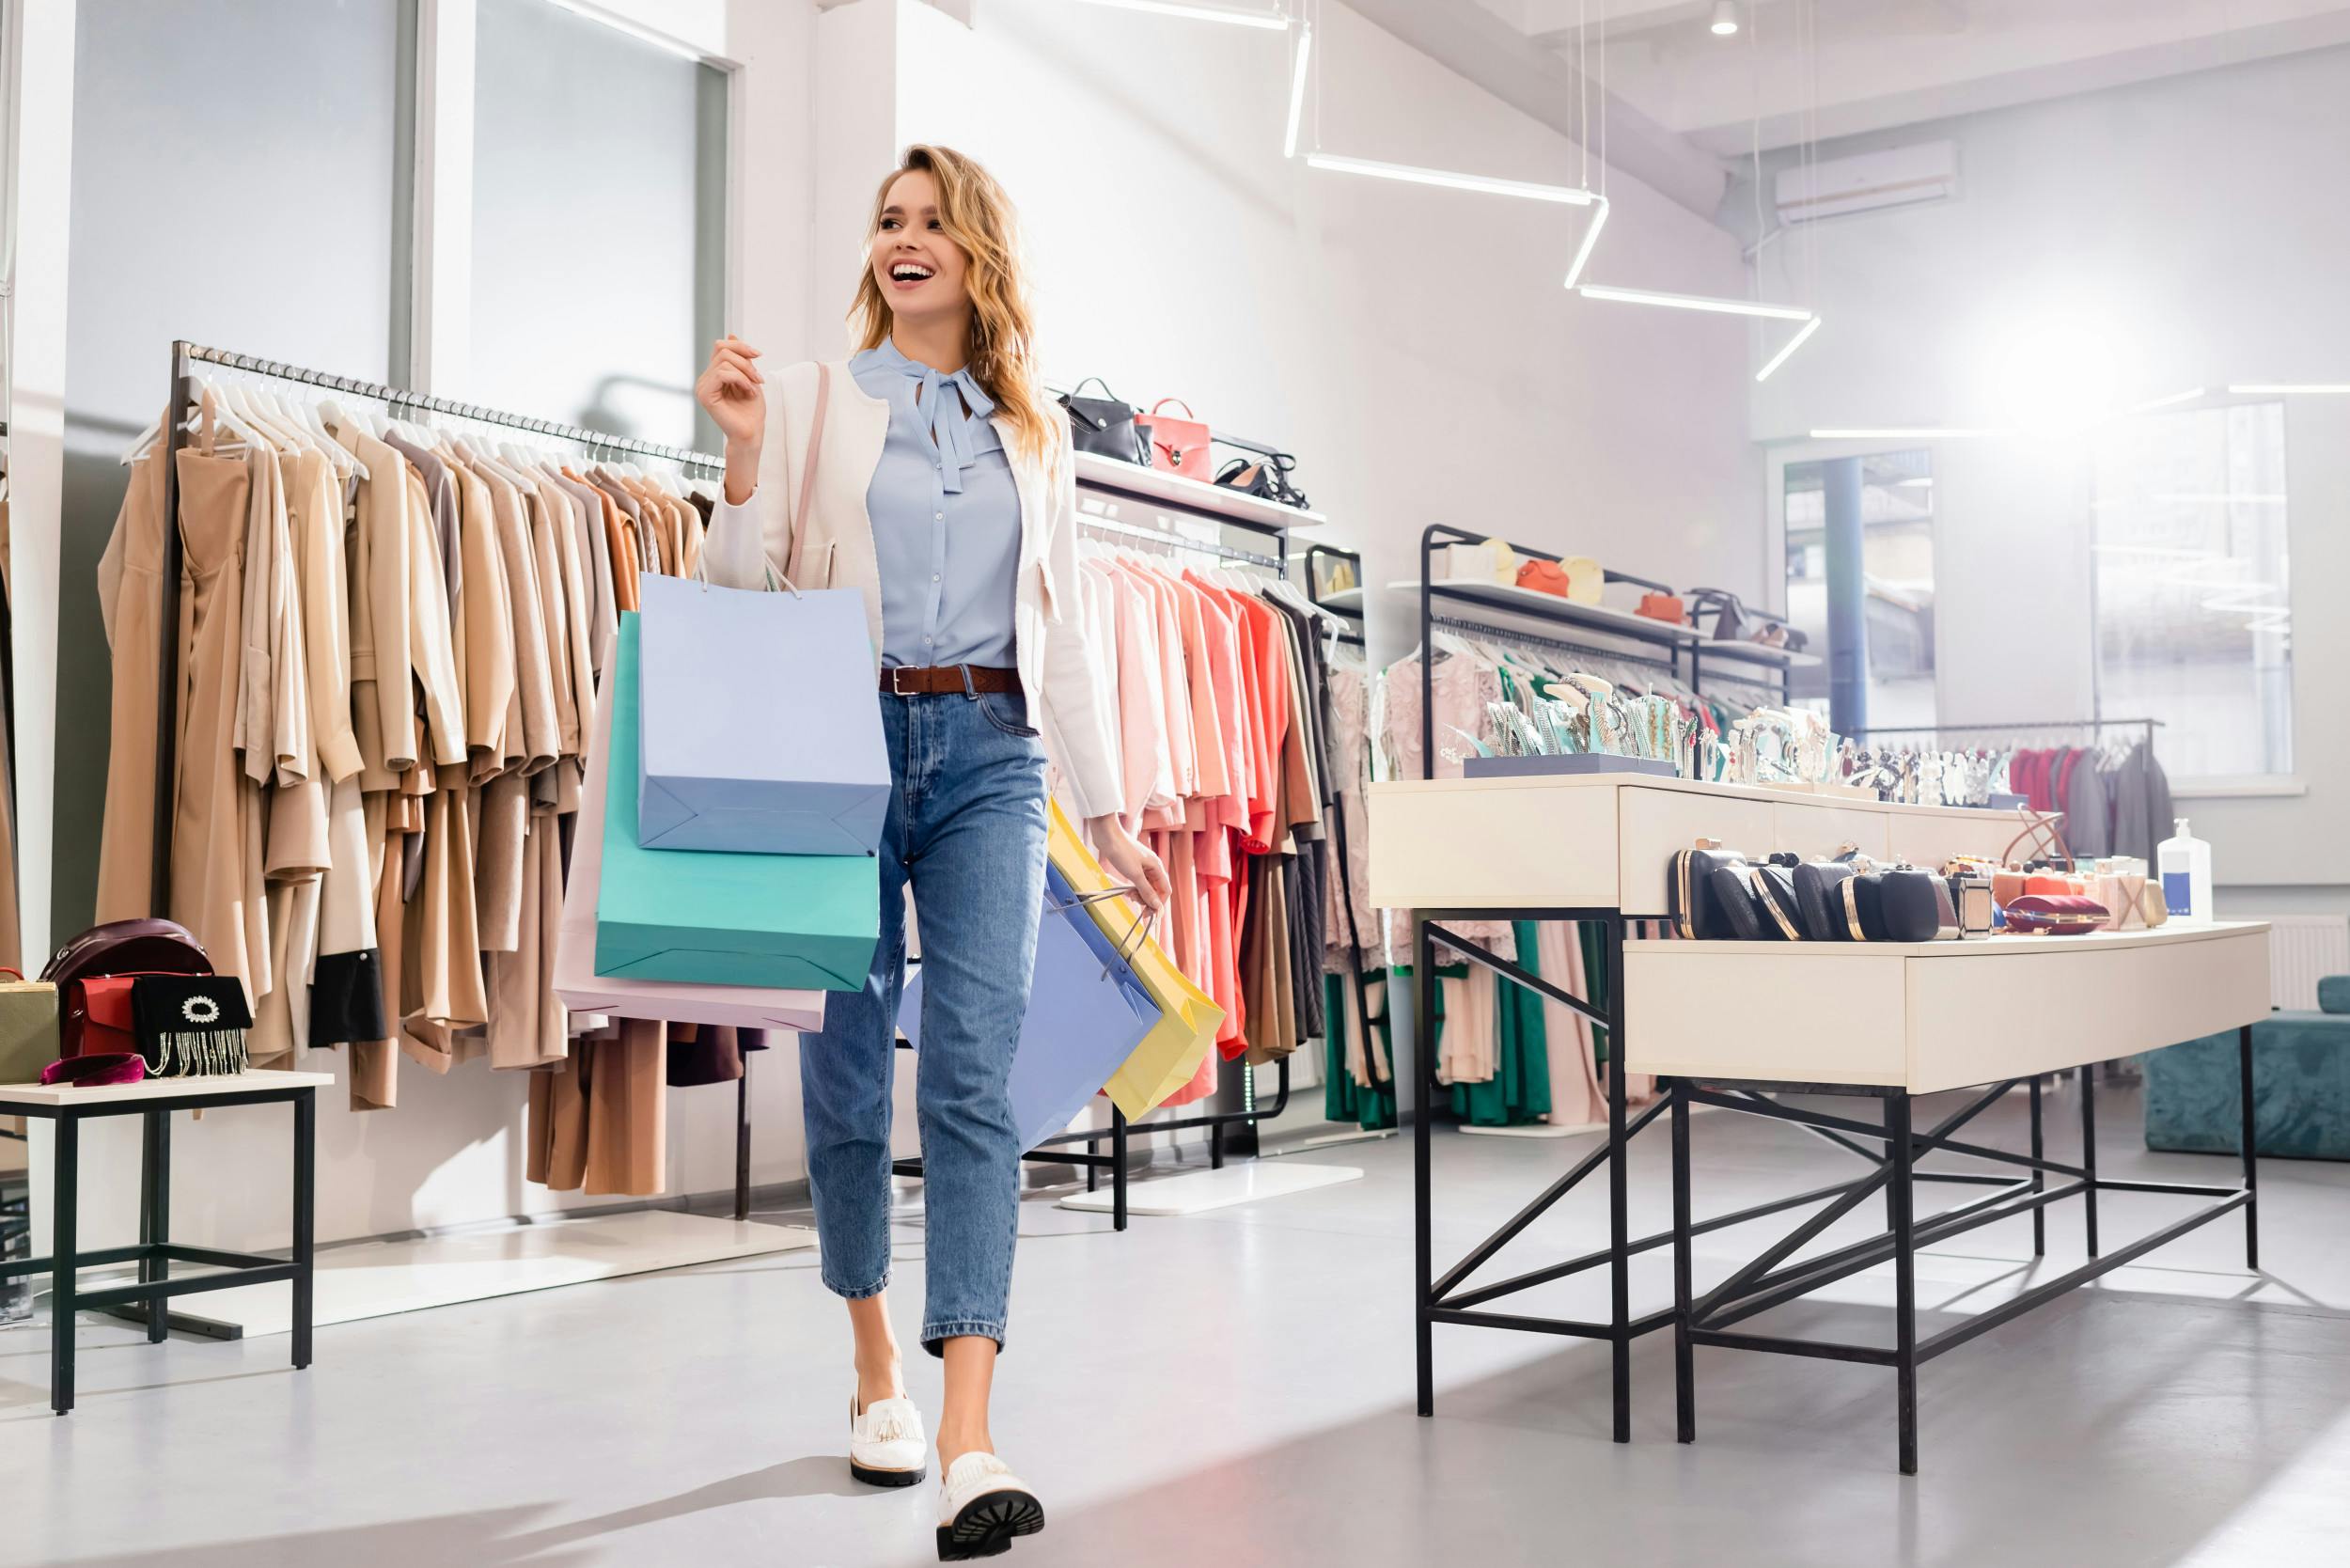 6 Things to Add to Your In-Store Experiences 